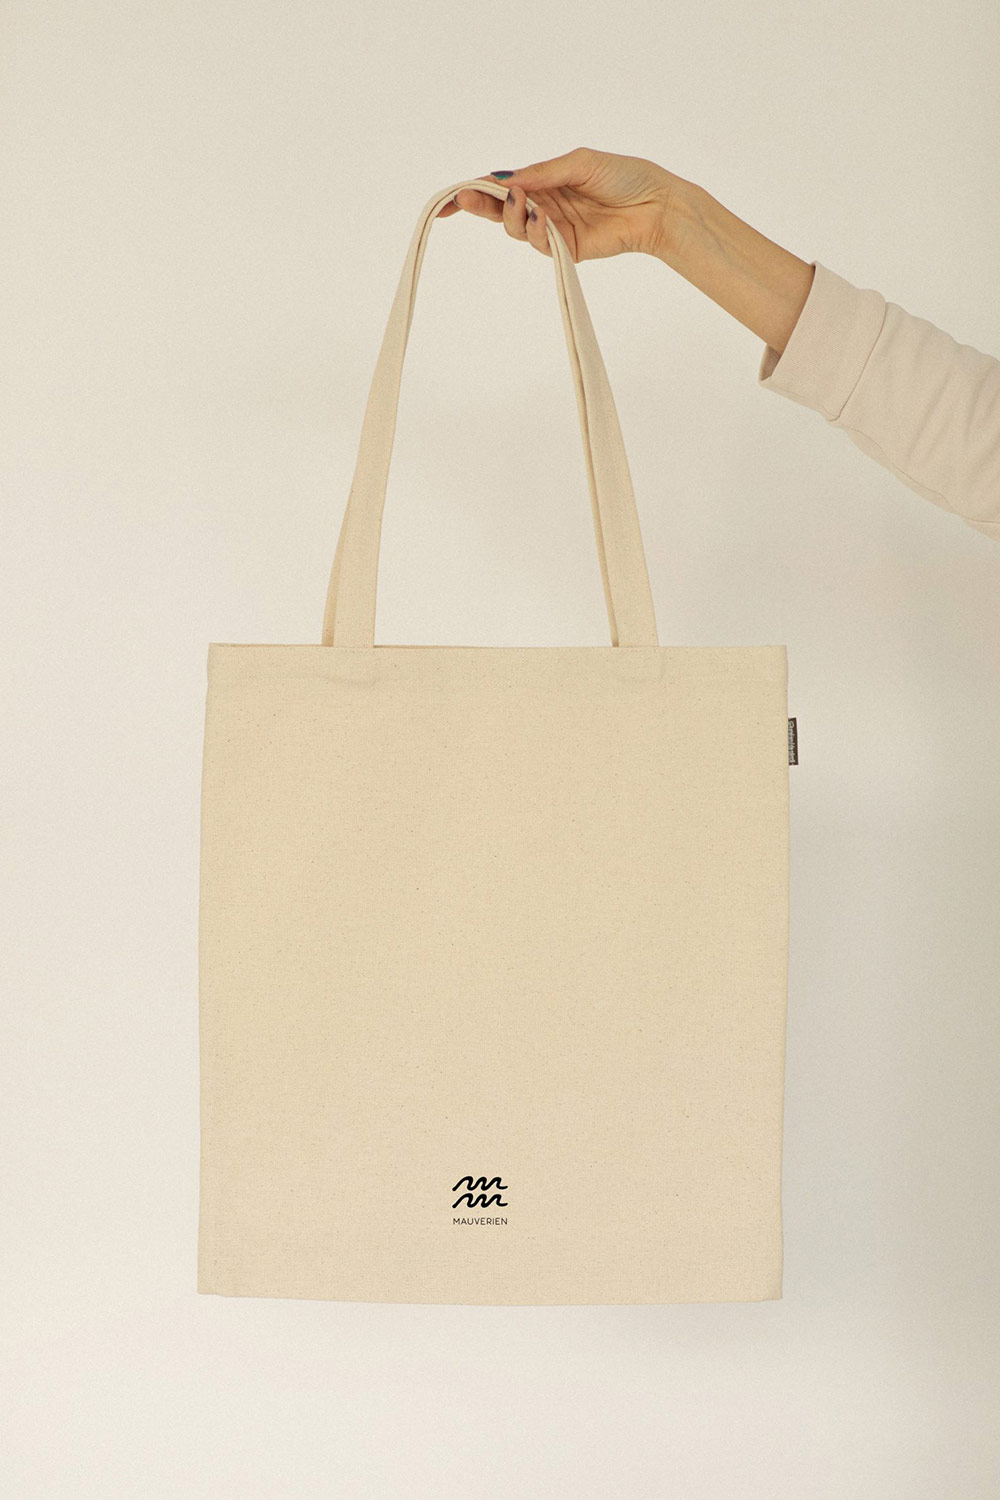 Back view of the blue fish cotton tote bag by Mauverien.